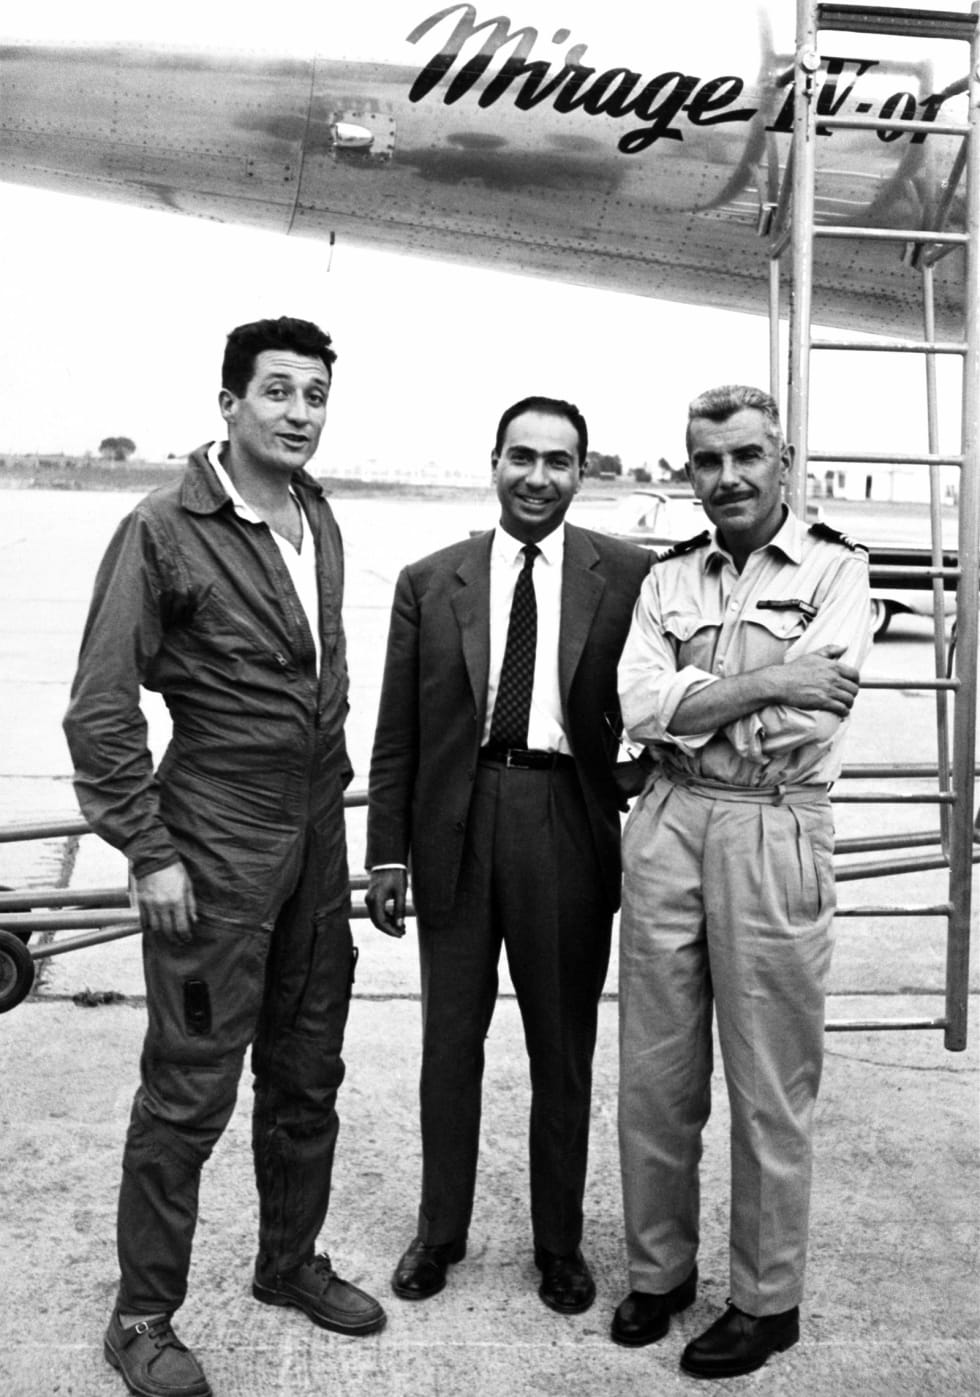 René Bigand, Serge Dassault and Roland Glavany in front of the Mirage IV 01